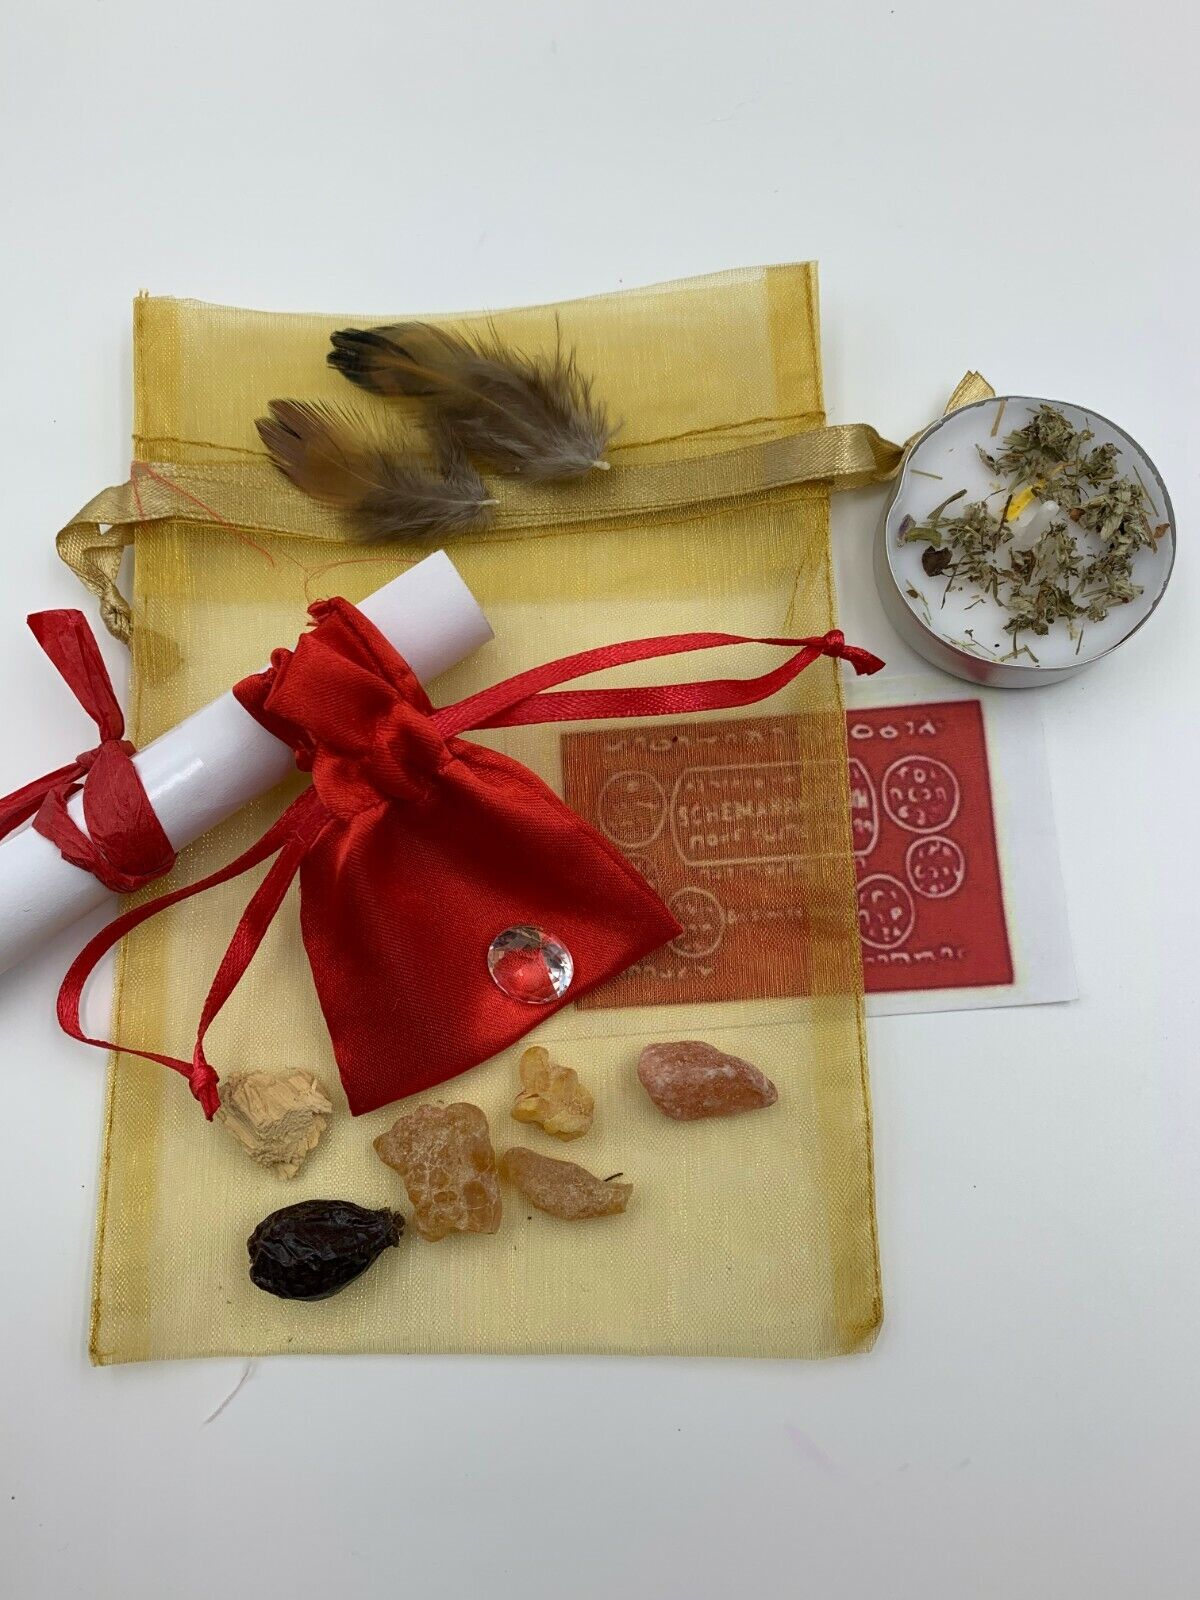 GET WHAT YOU WANT-WISHING. Old Witch Secret Mojo Bag by Best Spells Magick